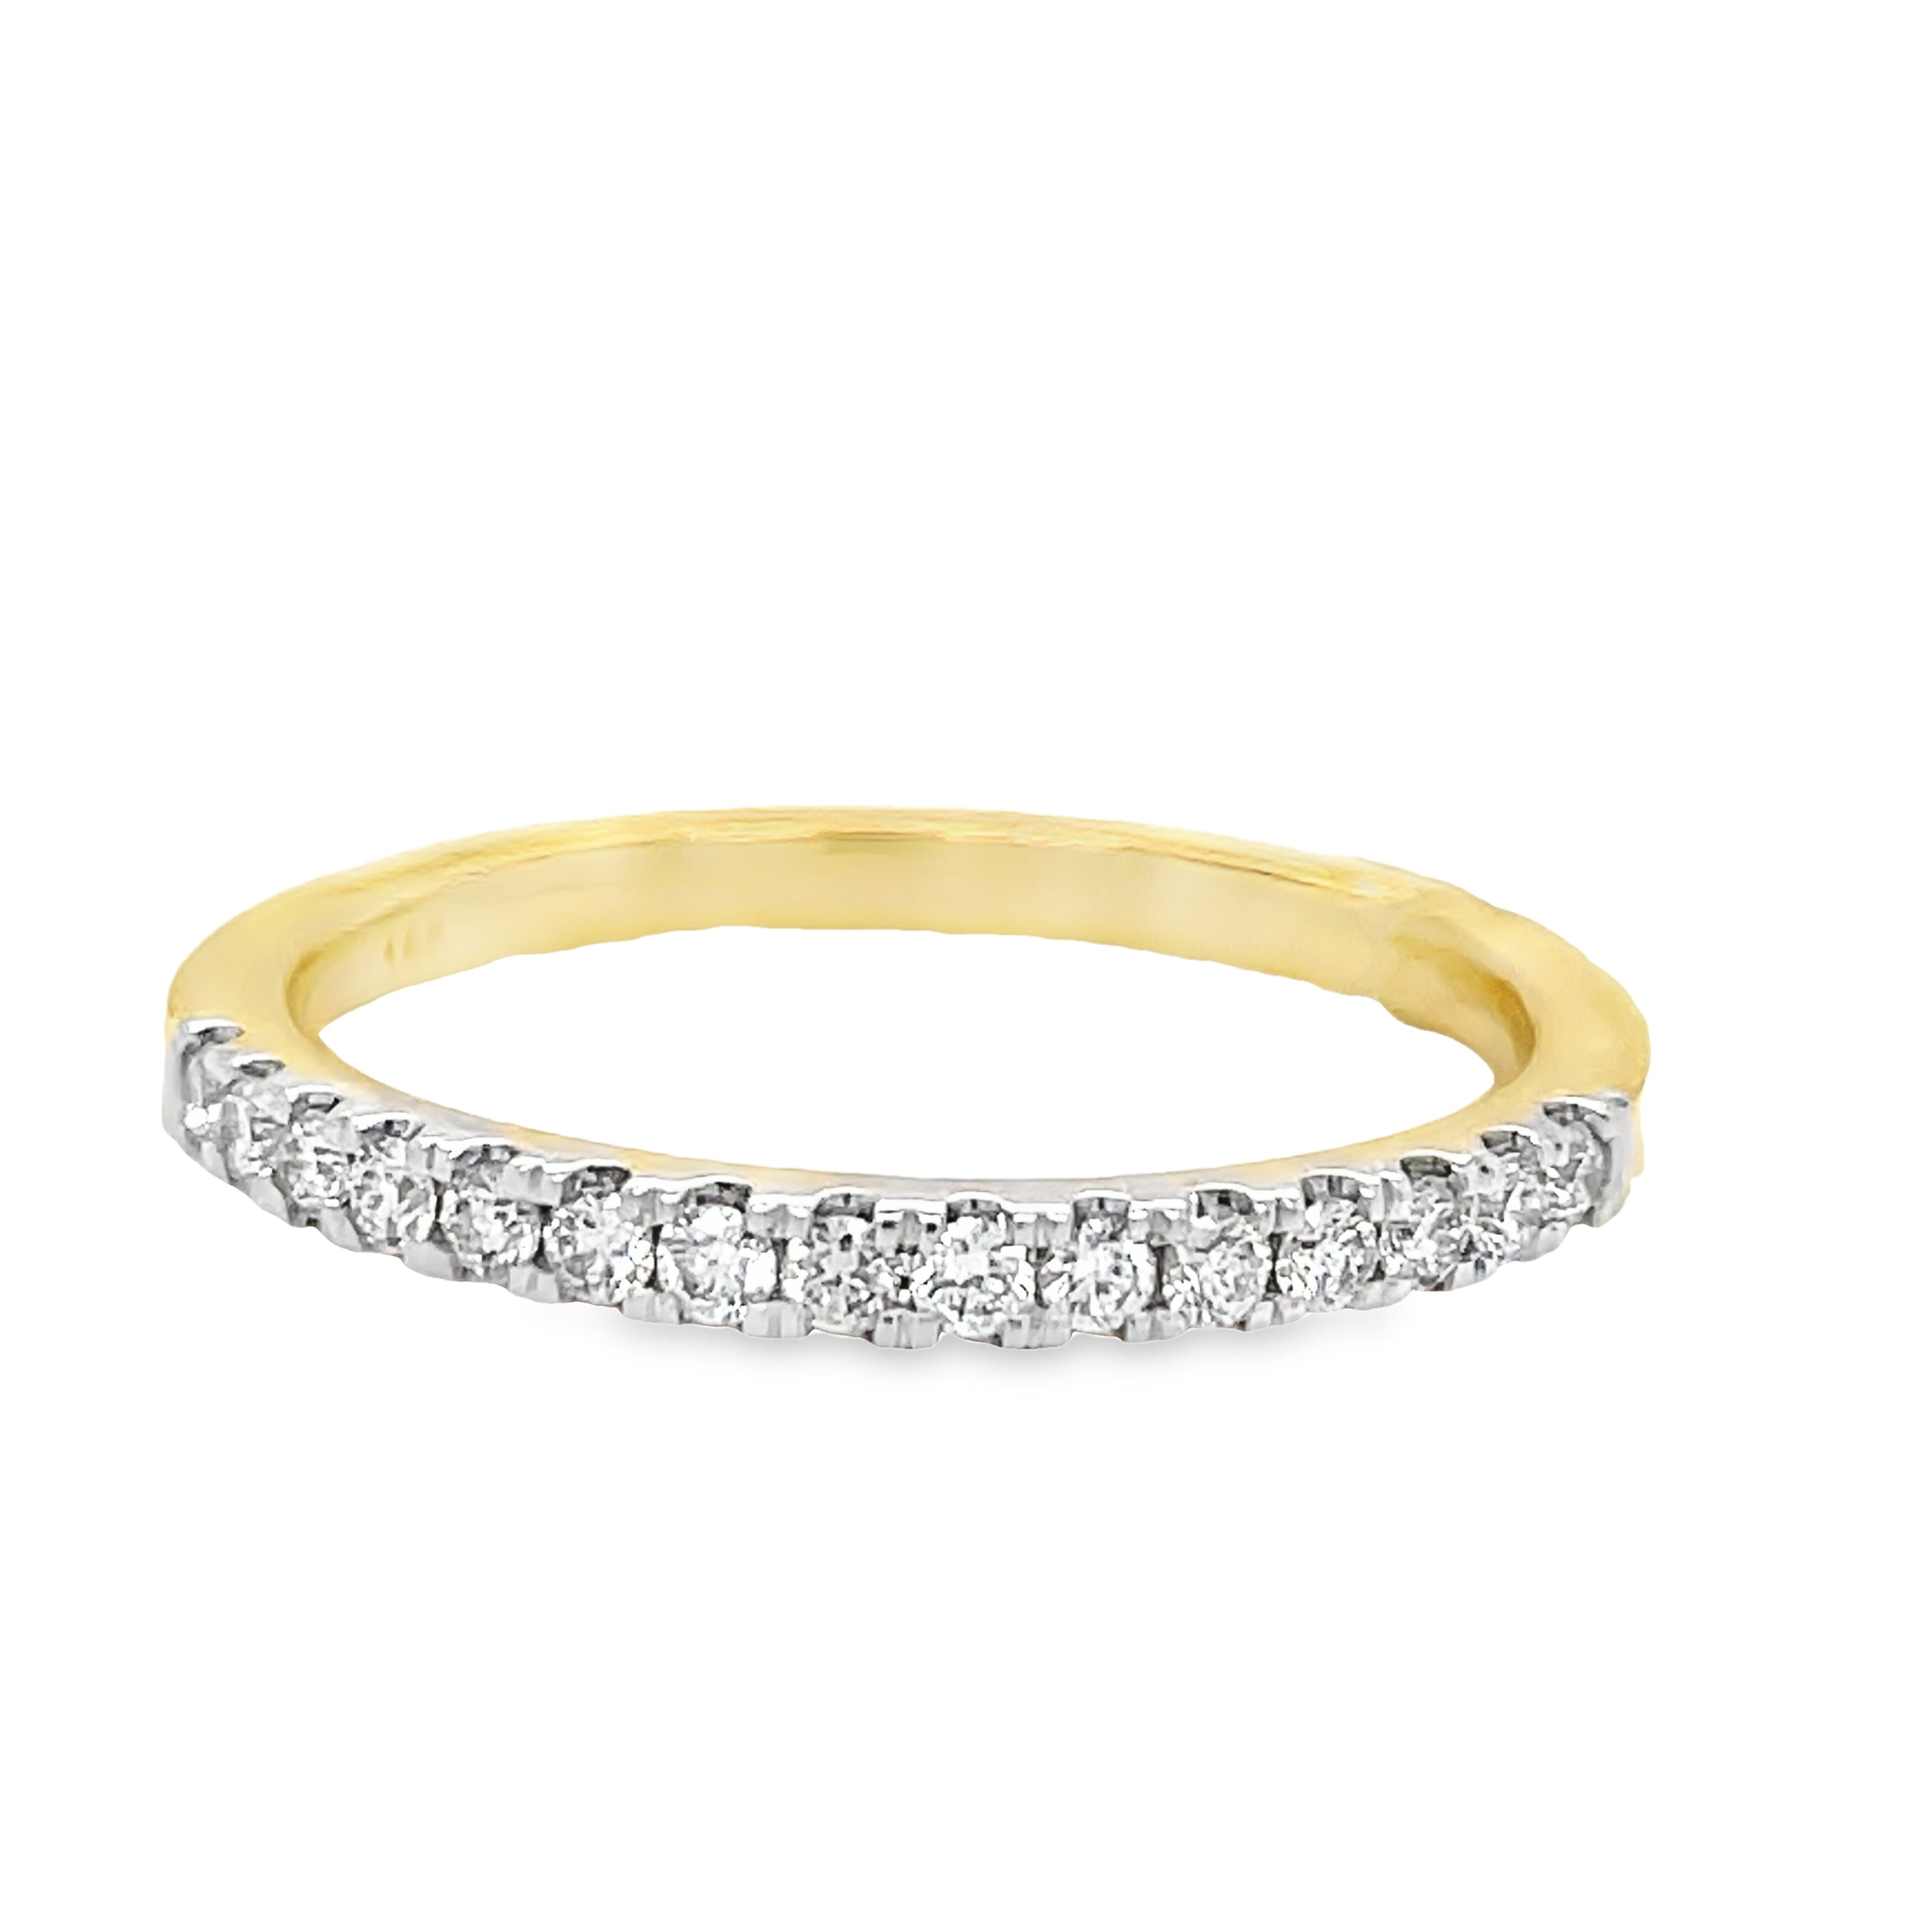 Celebrate an anniversary with this exquisite 0.21 ct diamond ring. Crafted in 14k yellow gold band, the diamond is set in a prong setting for maximum sparkle. Guaranteed to impress.